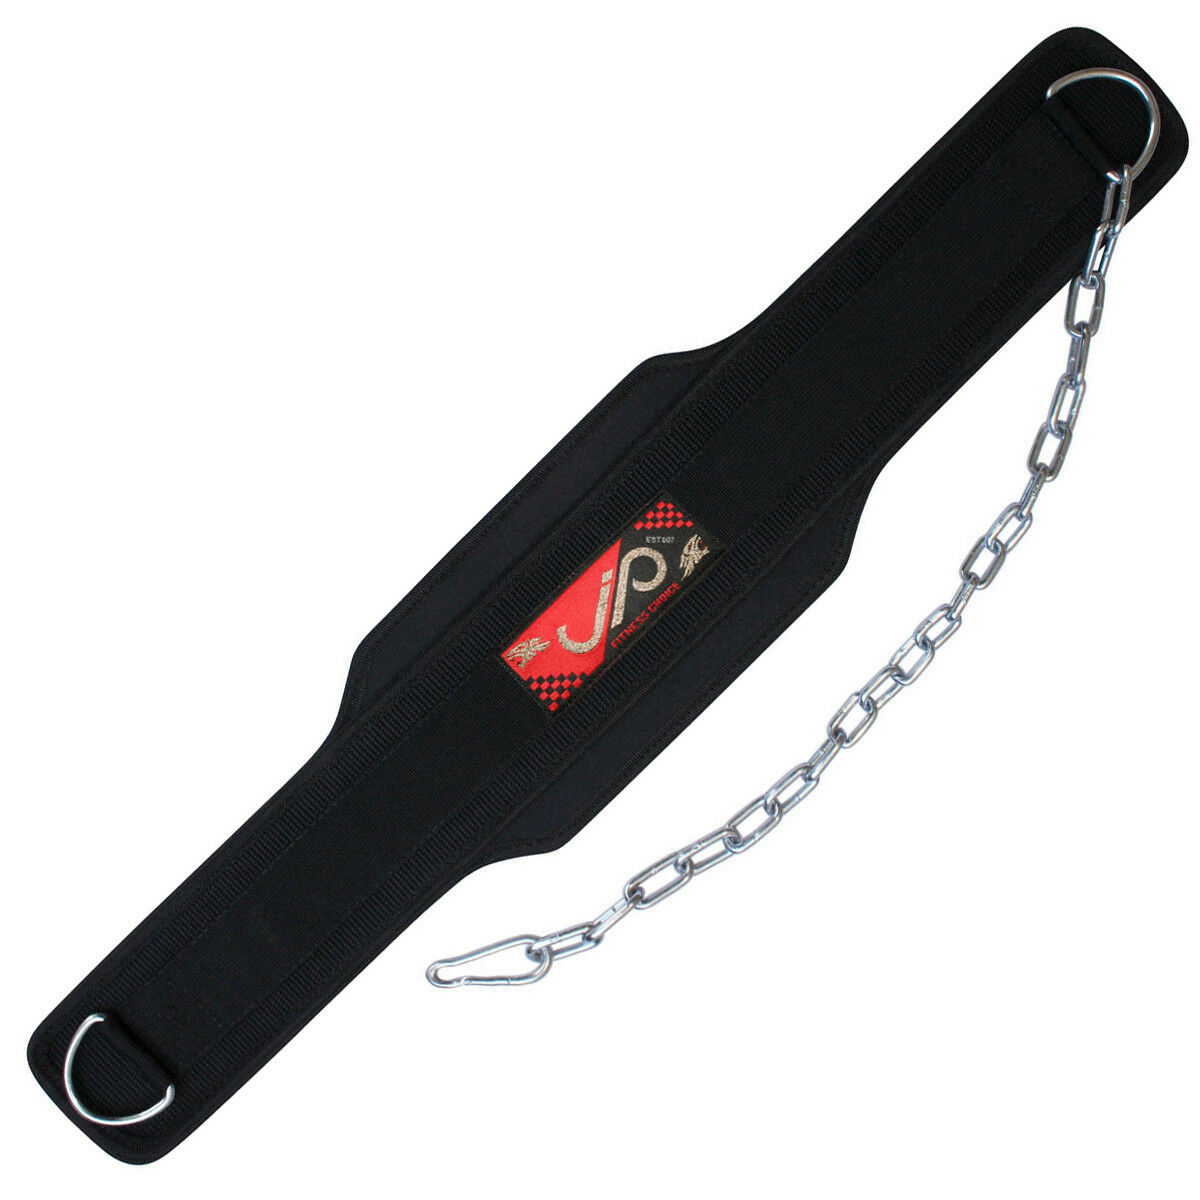 JP Weight Lifting Dip Belt with Chain